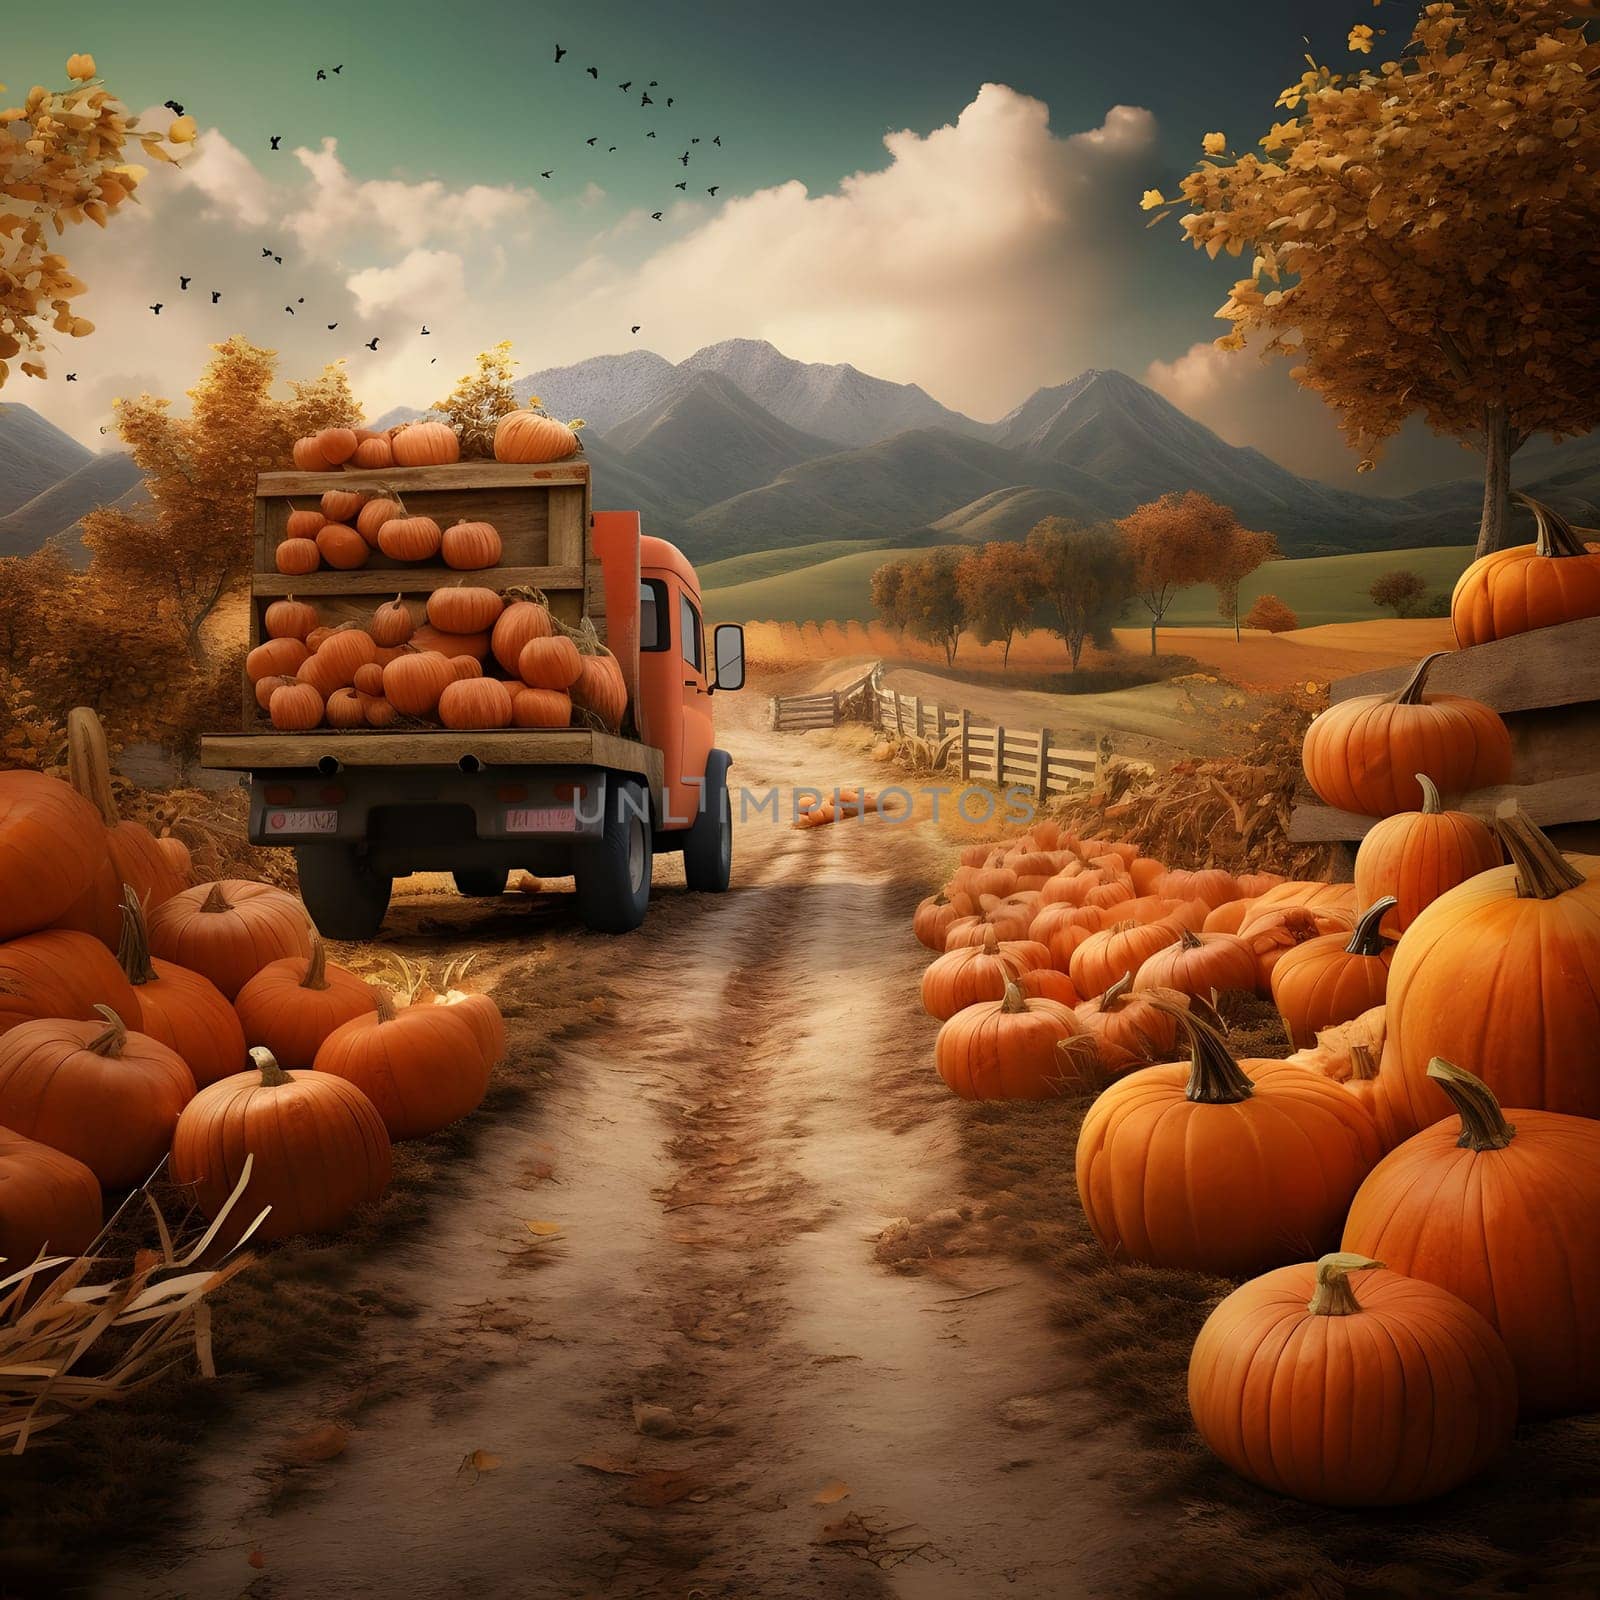 Delivery truck loaded with pumpkins all around pumpkins waiting for transport, field, mountains in the background. Pumpkin as a dish of thanksgiving for the harvest. by ThemesS